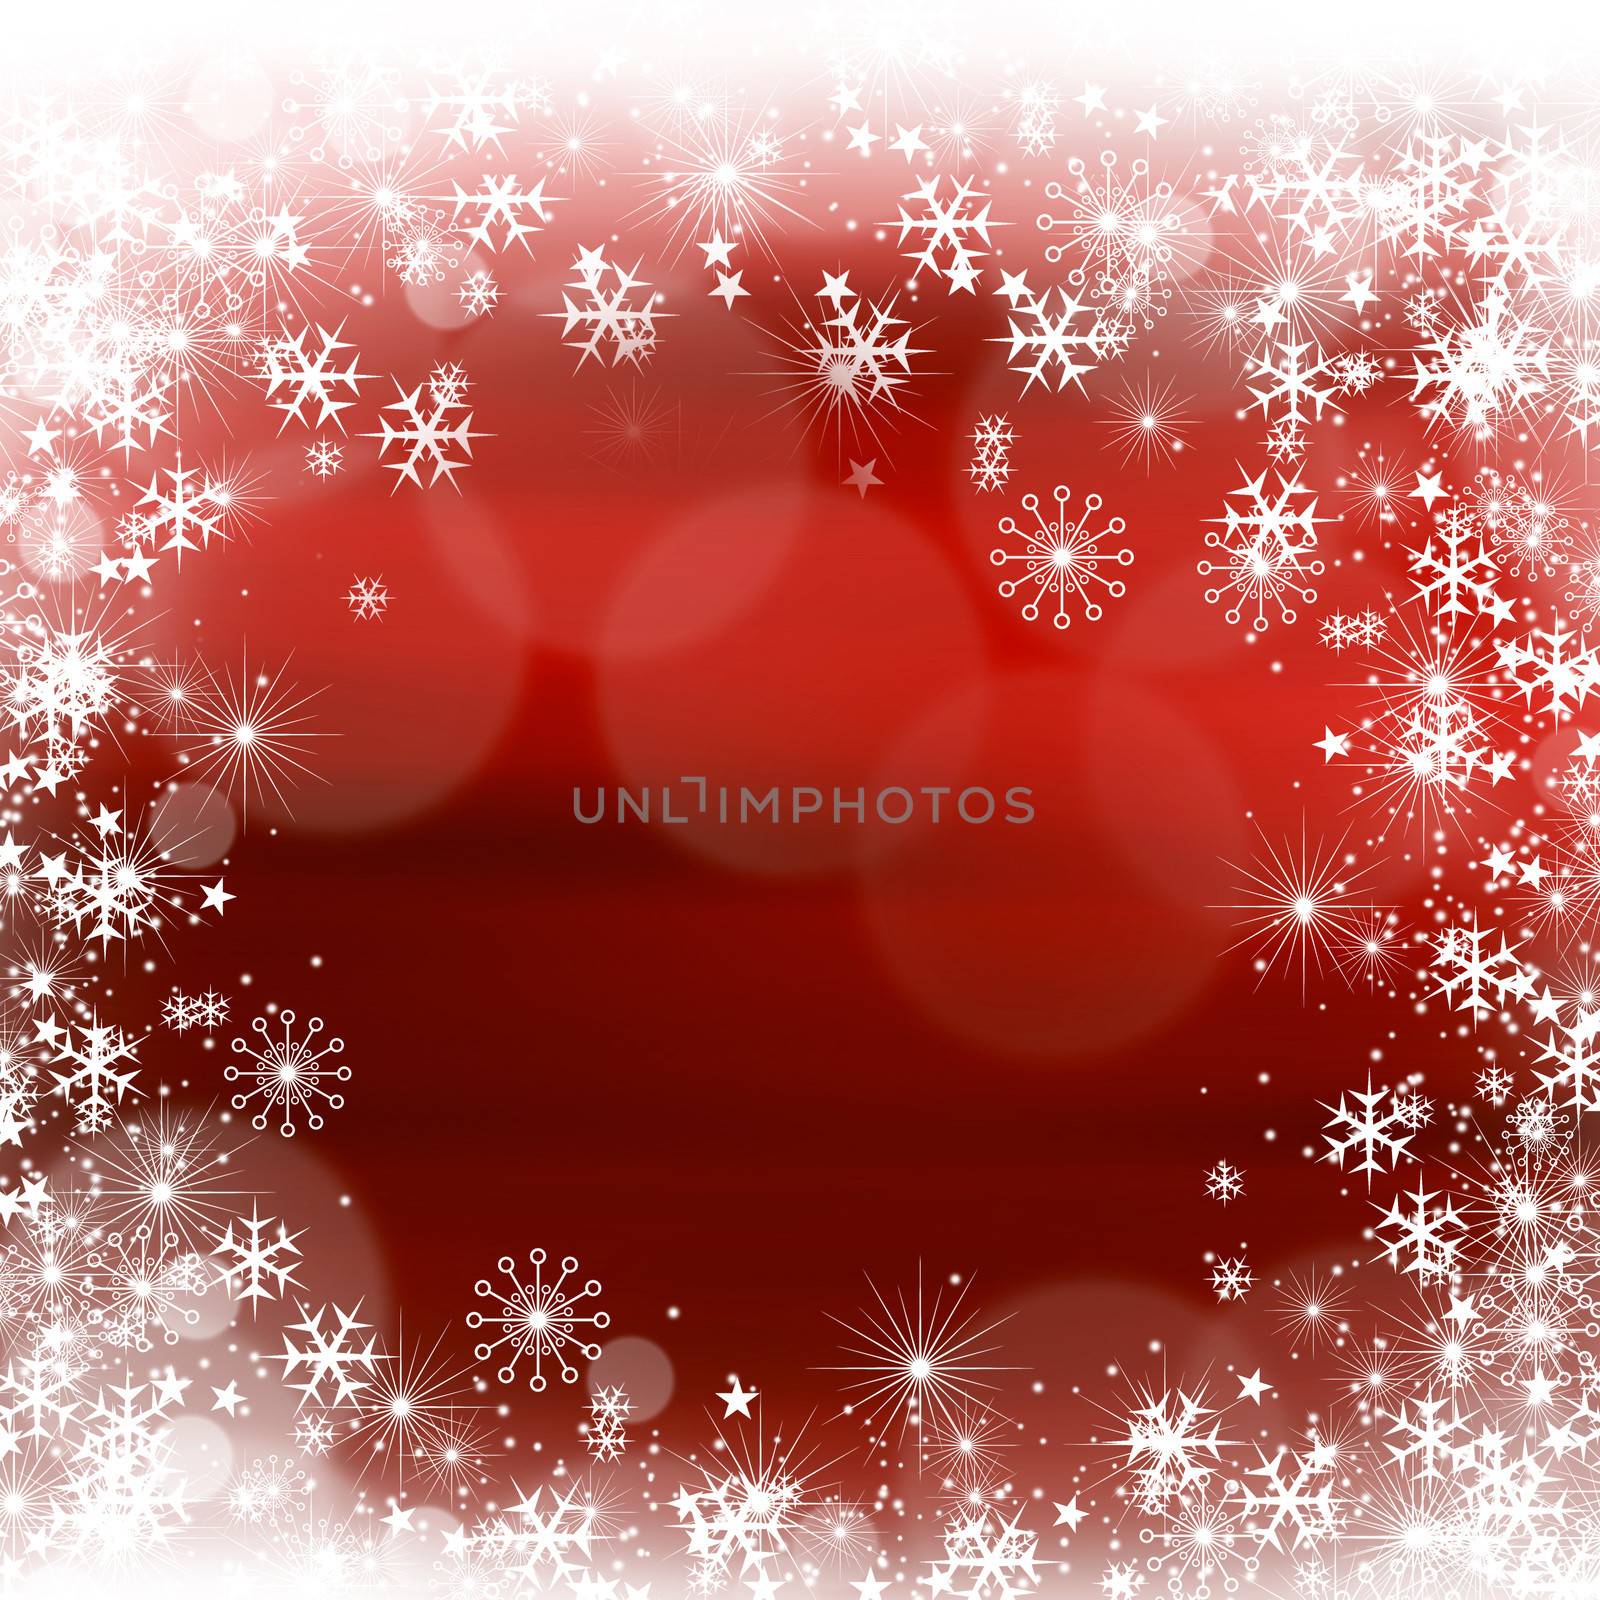 Red shiny stars and snowflakes christmas background